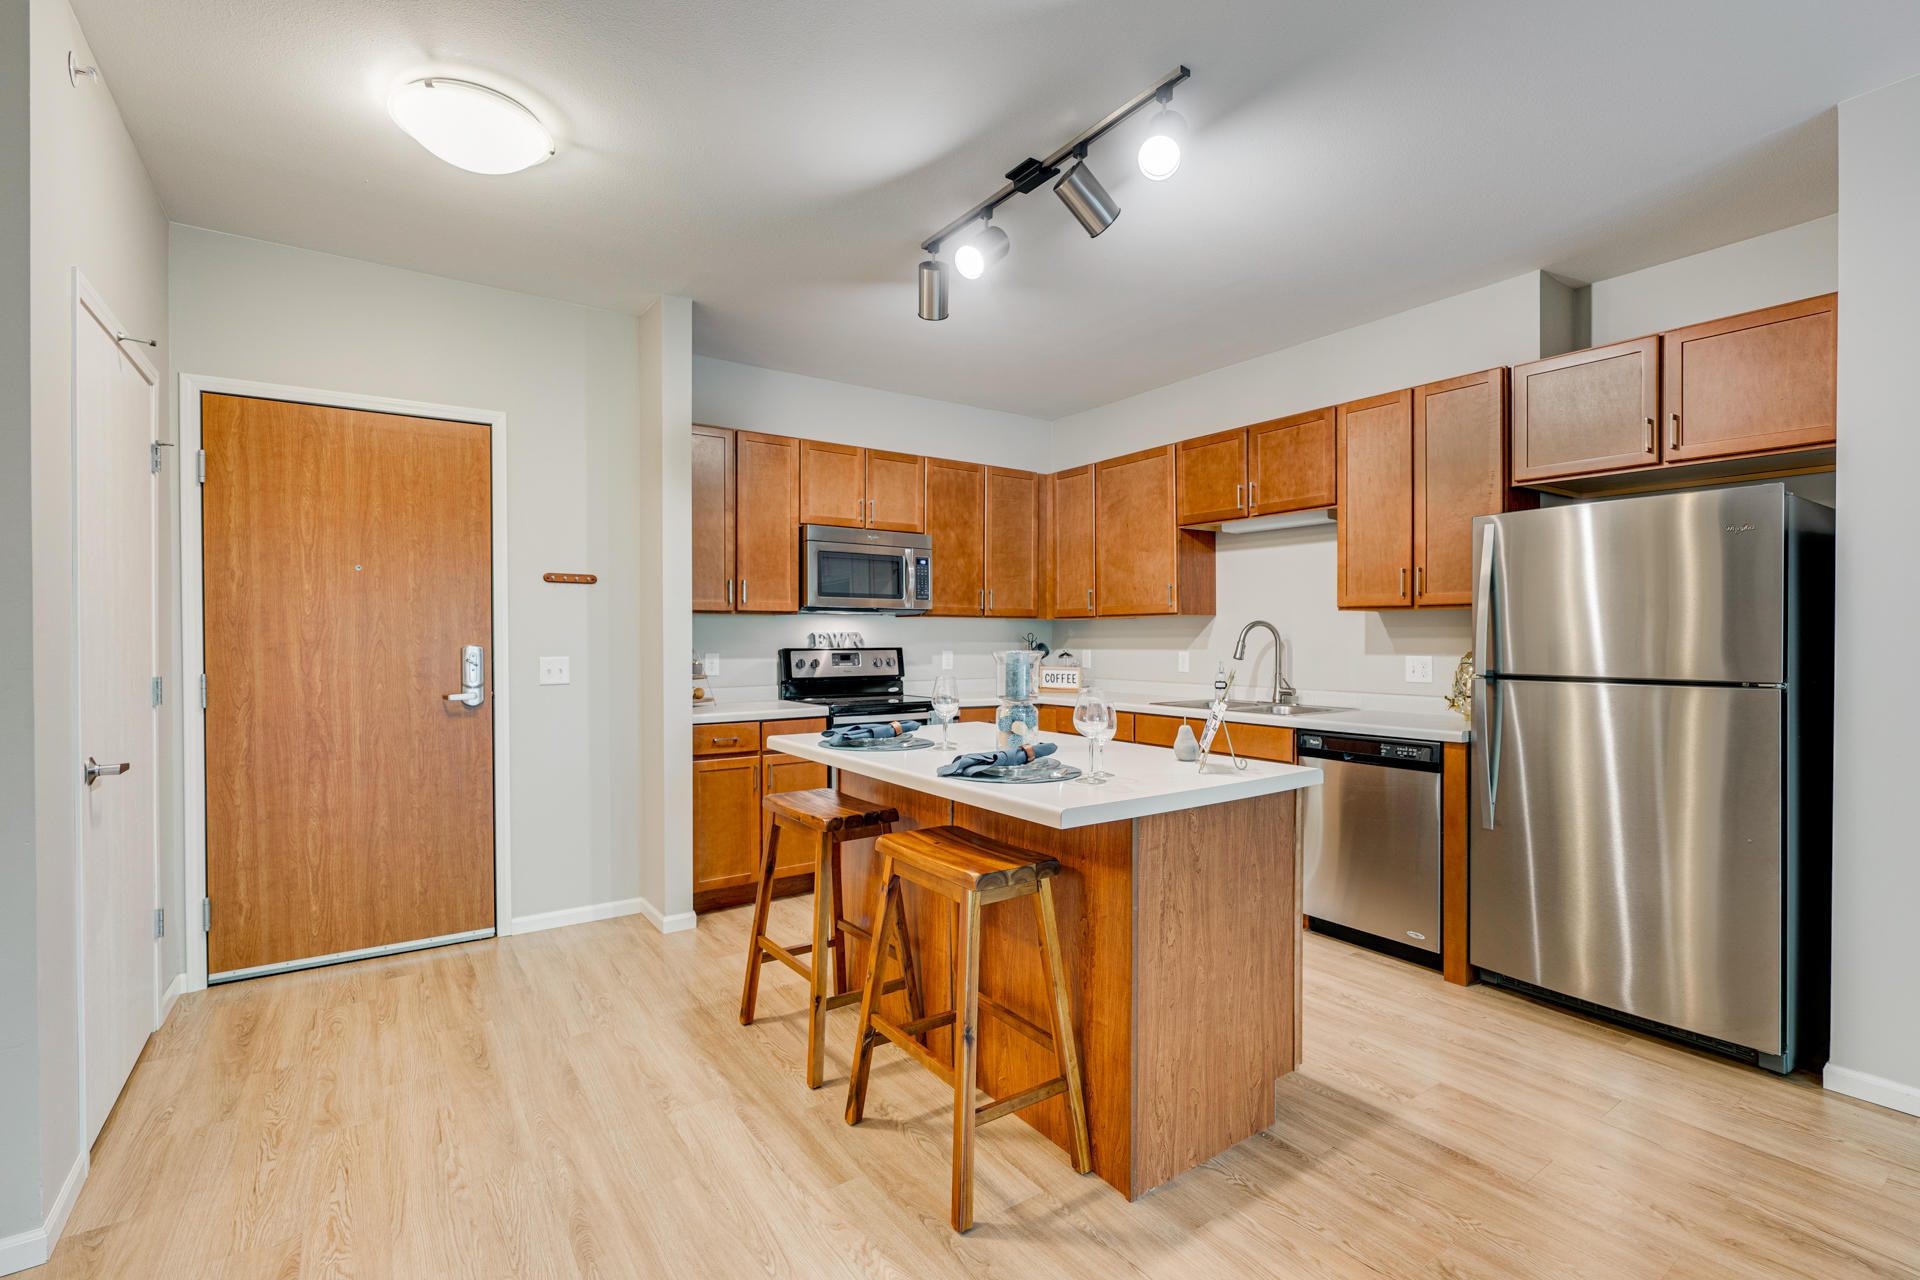 Fully-Equipped Kitchen With Stainless Steel Appliances